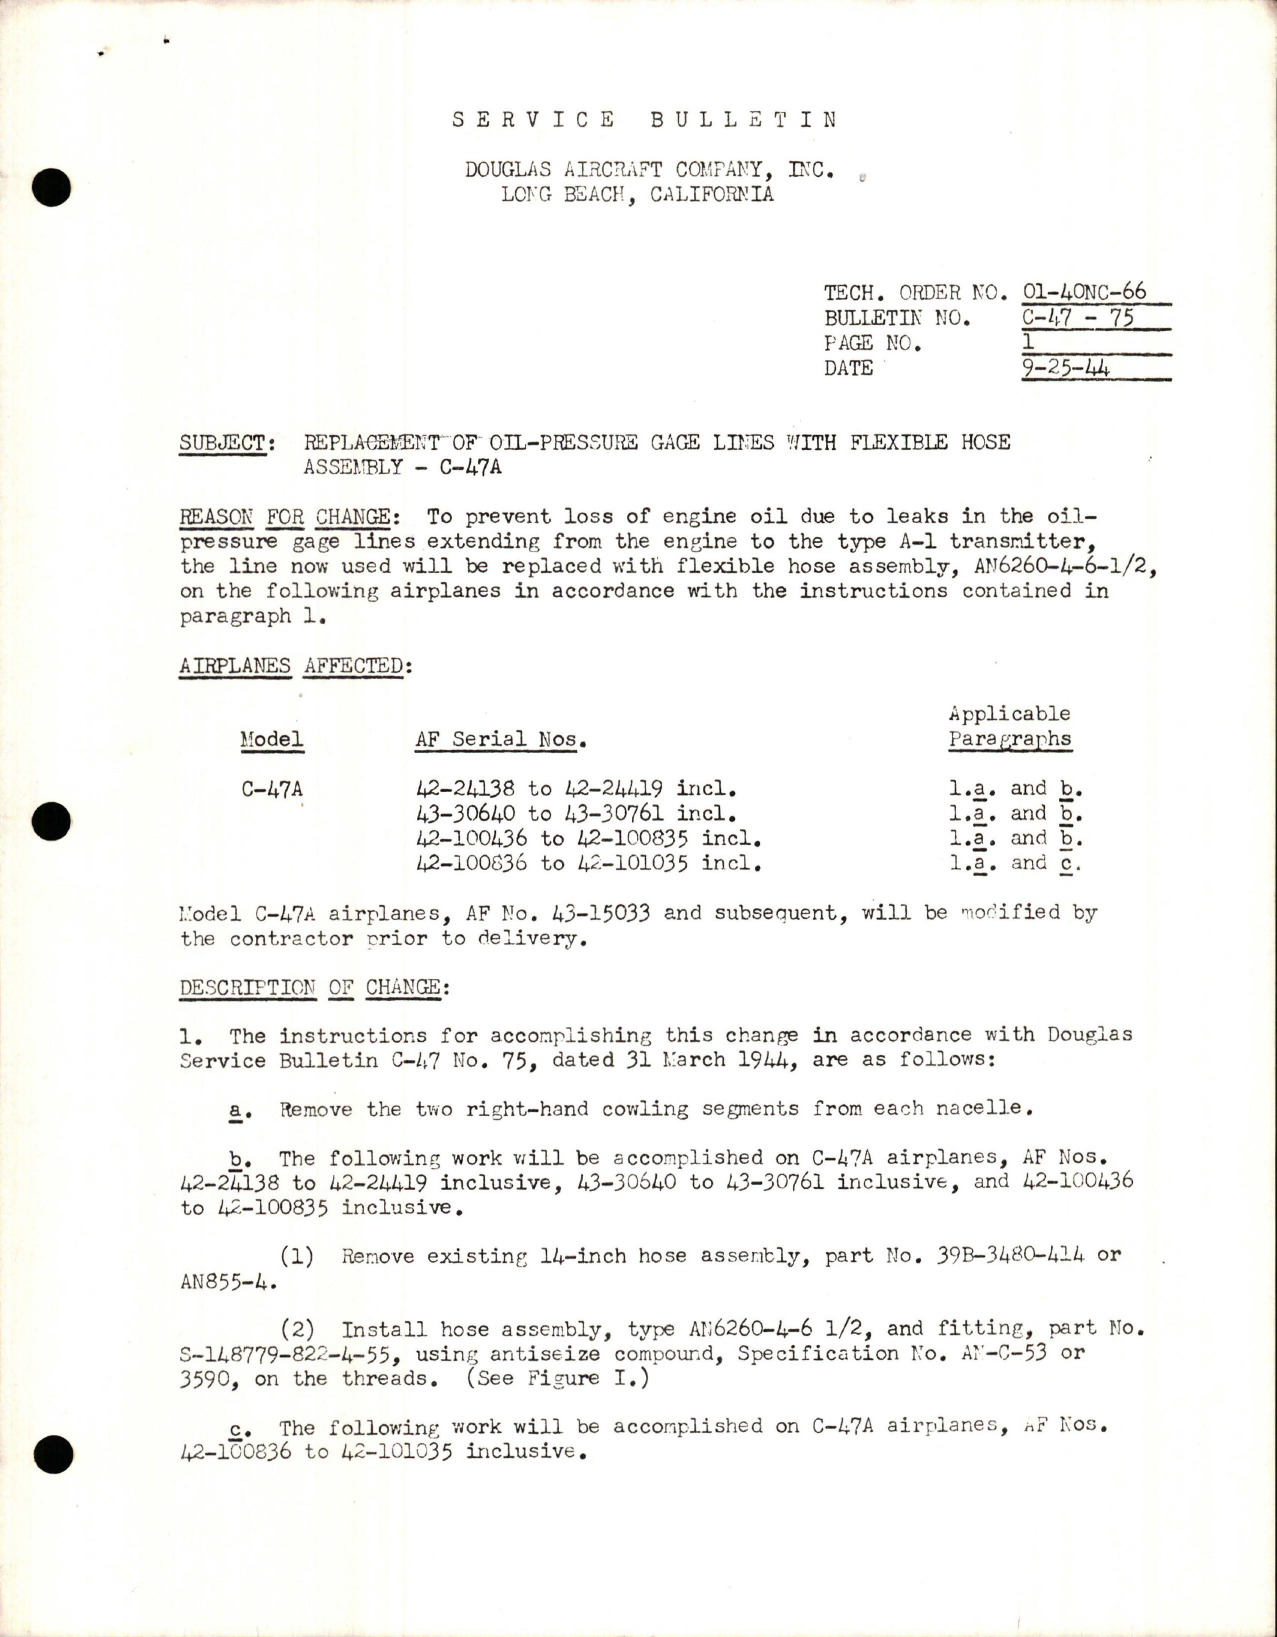 Sample page 1 from AirCorps Library document: Replacement of Oil-Pressure Gage Lines with Flexible Hose Assembly